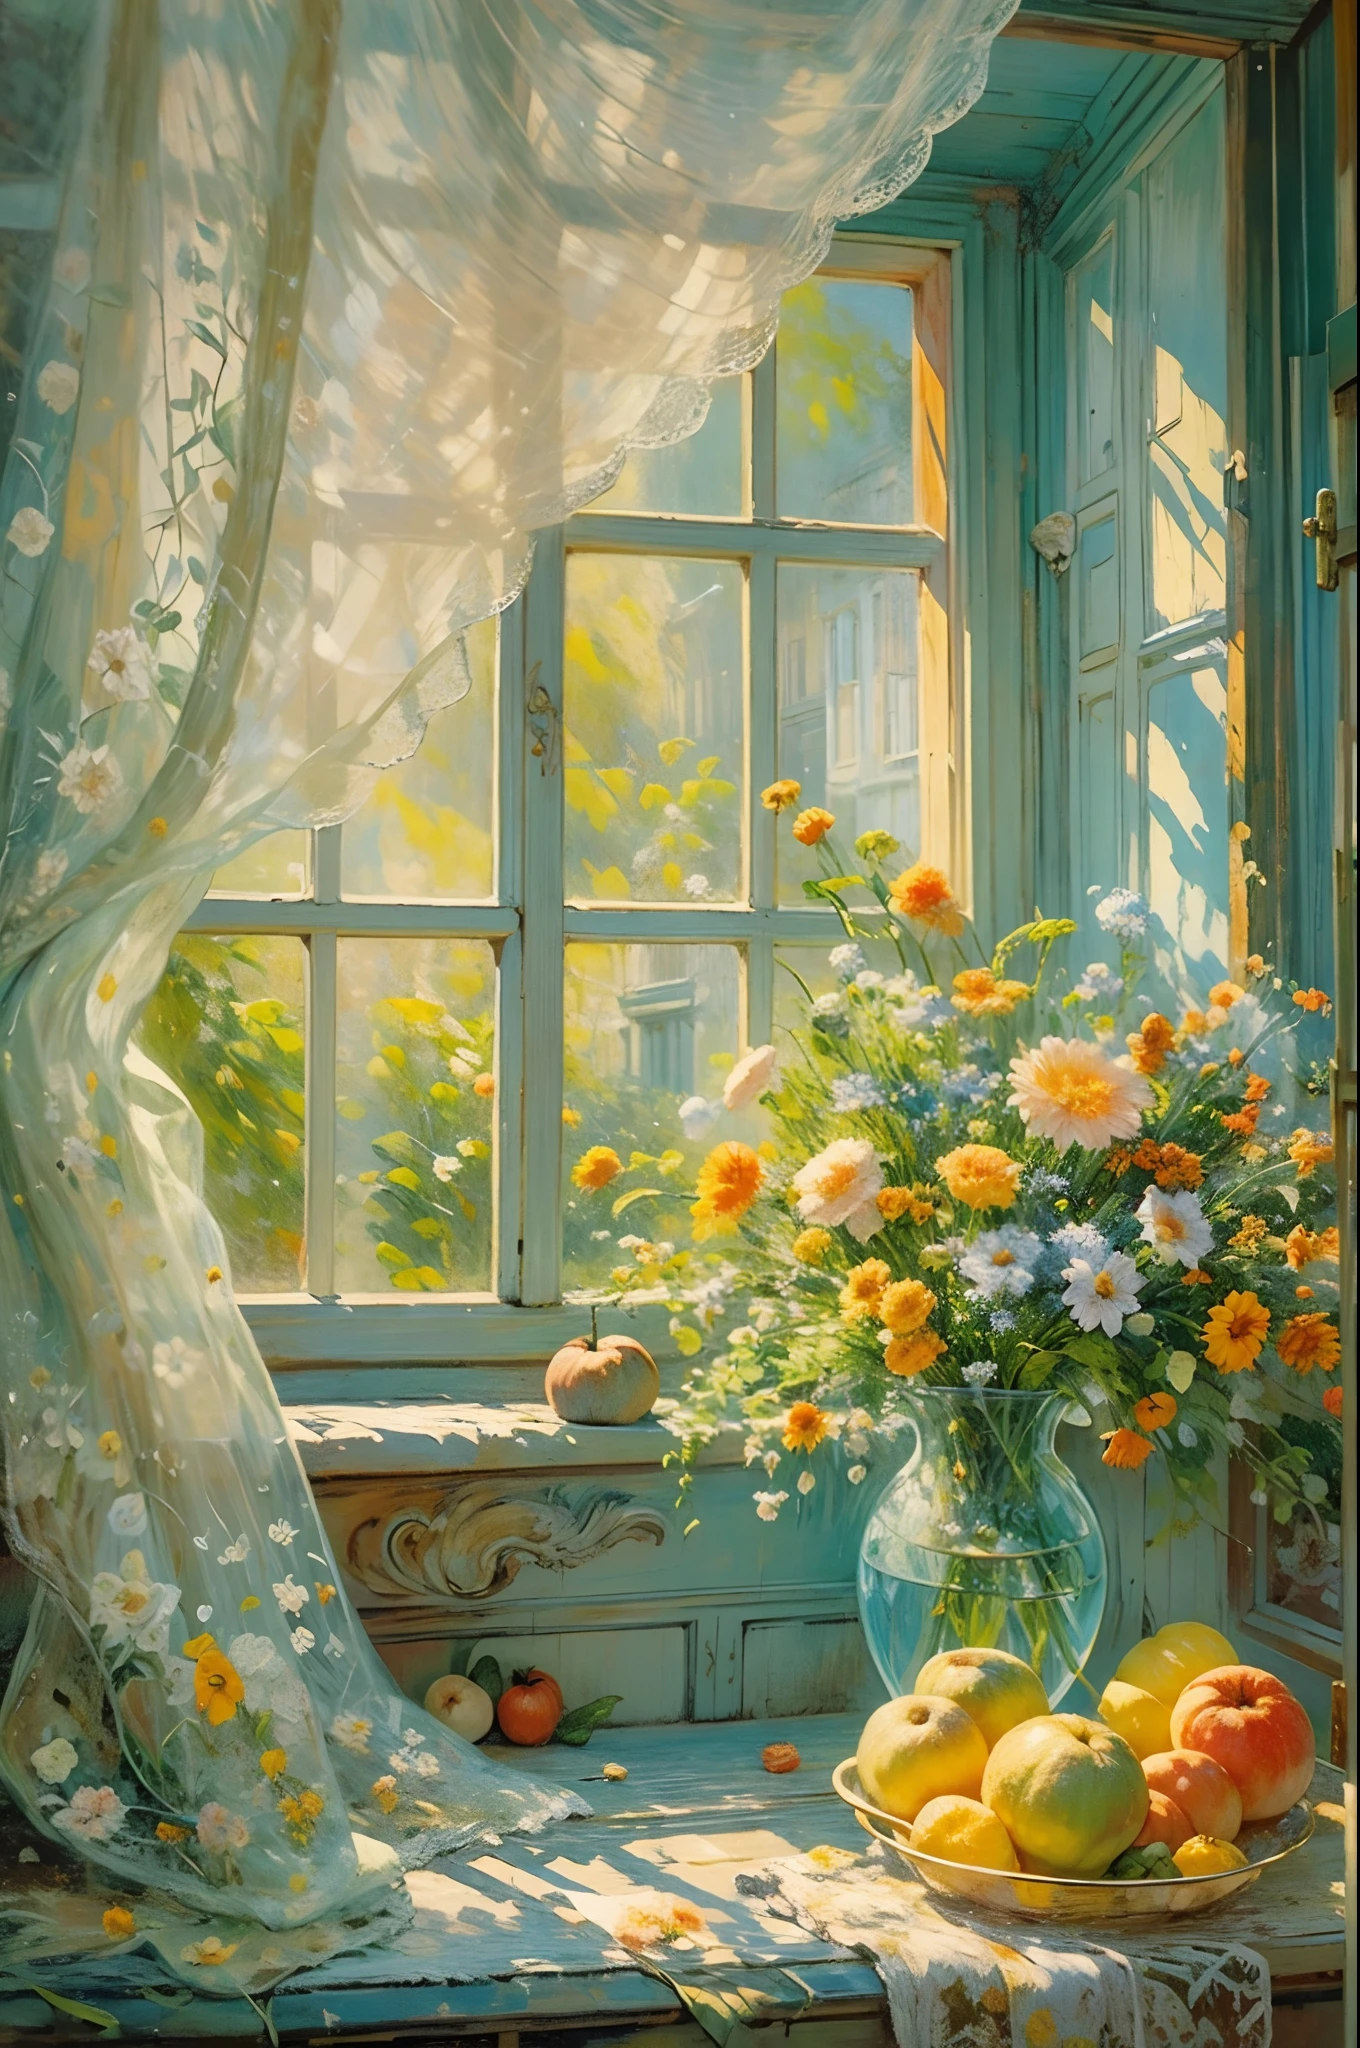 oil painting still life, vintage illustration of a window at the sunny day, iridescent light, soft light, rain drops, lacy curtains, flowers, fruits, dynamic light